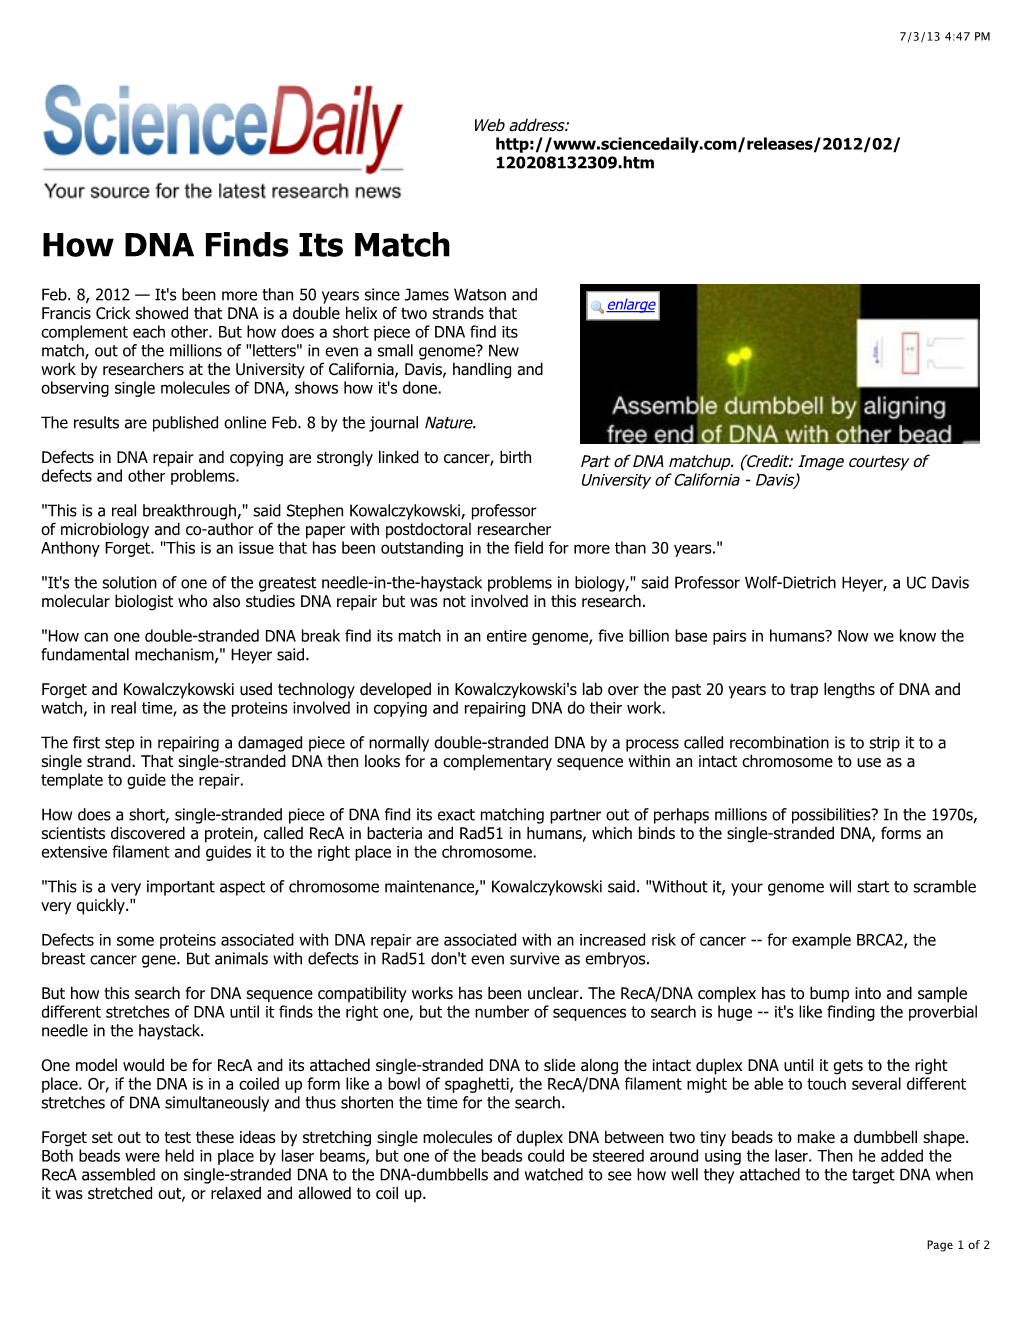 How DNA Finds Its Match